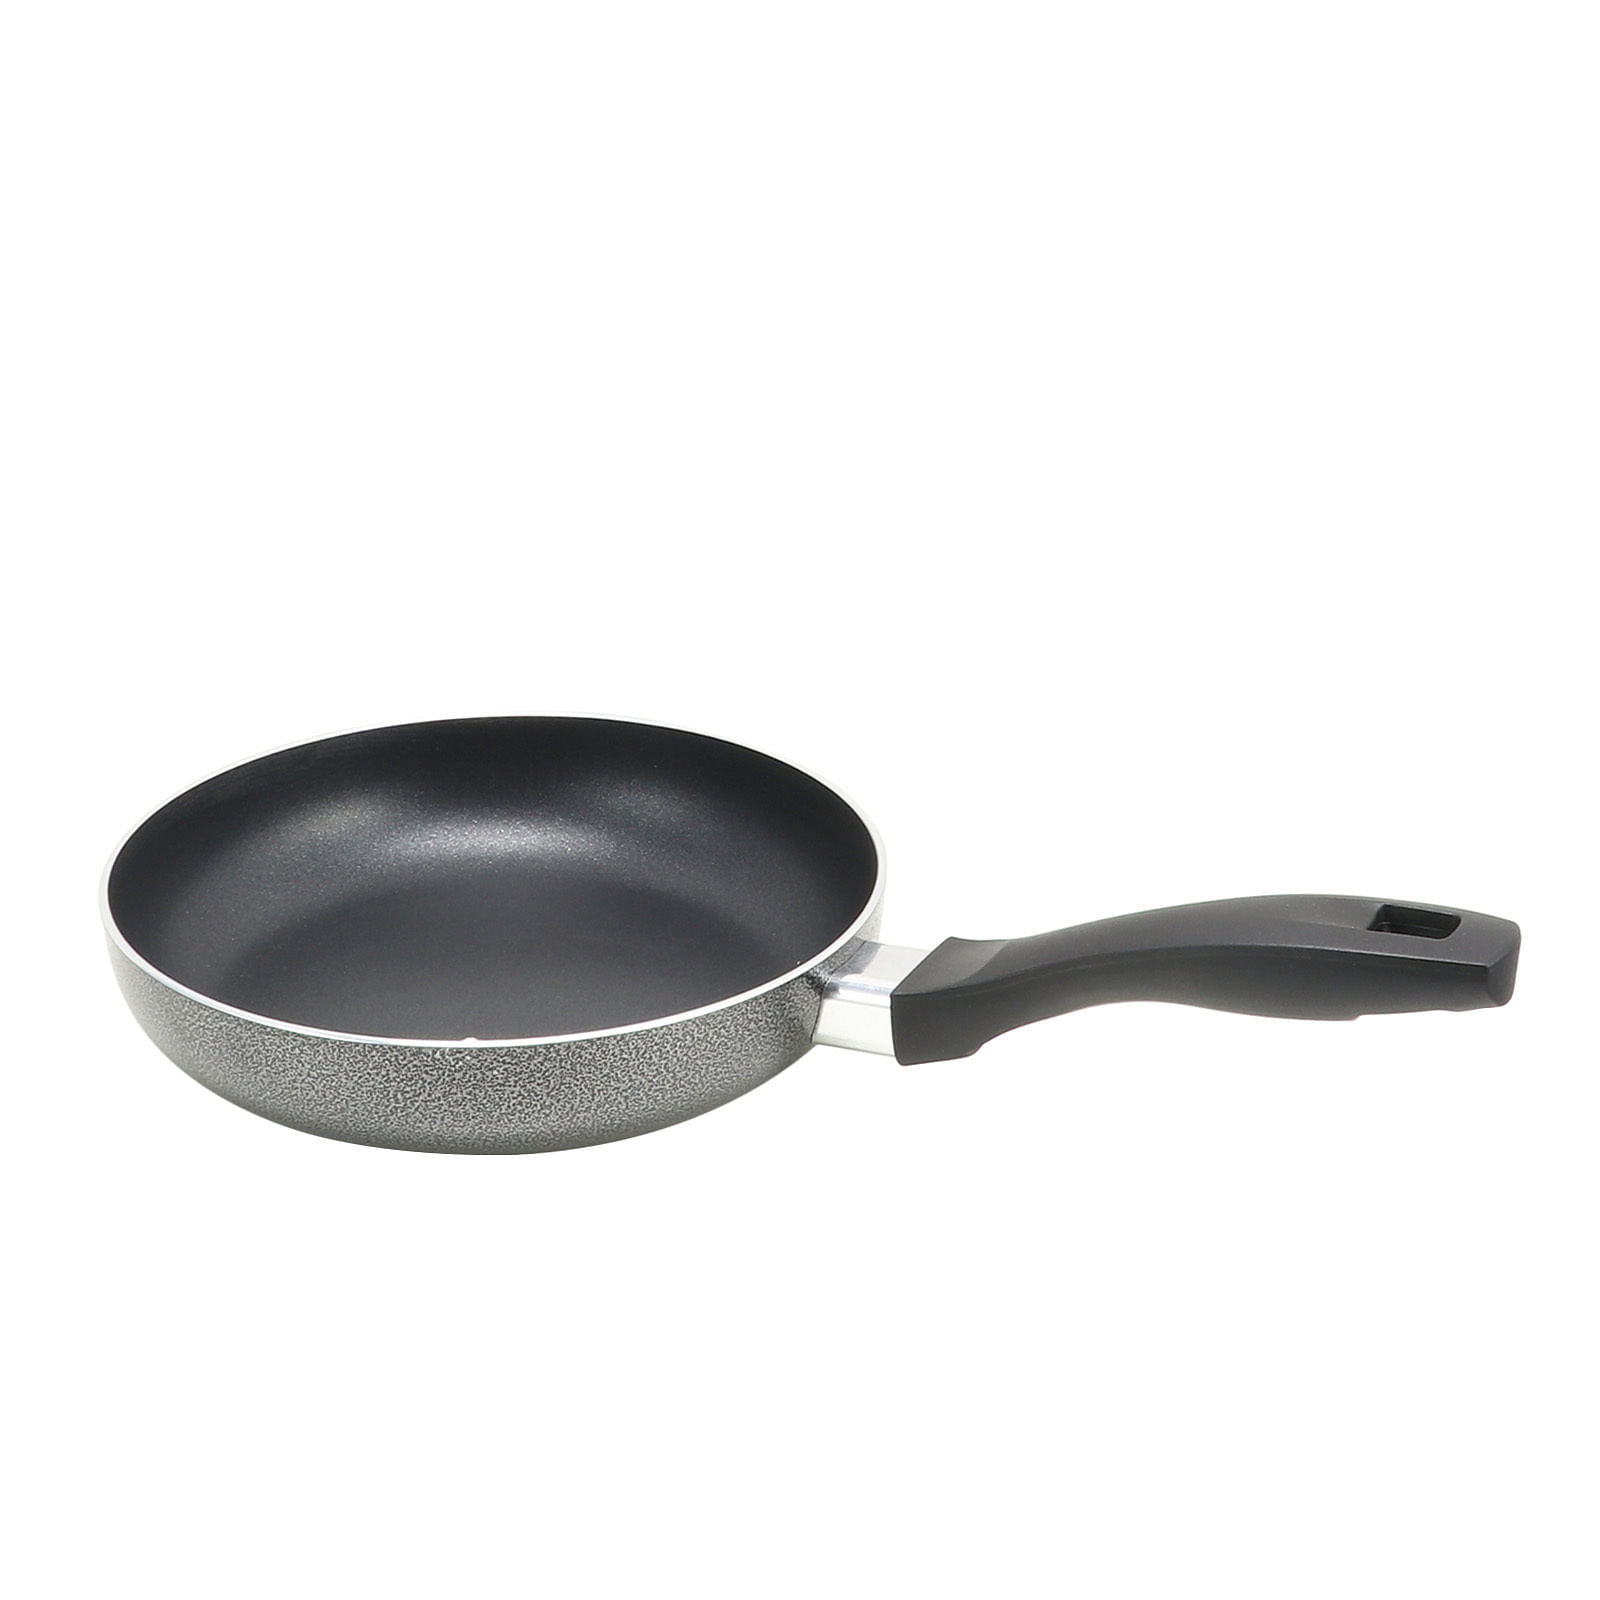 Oster Clairborne 8 Inch Aluminum Frying Pan in Charcoal Grey - $45.04